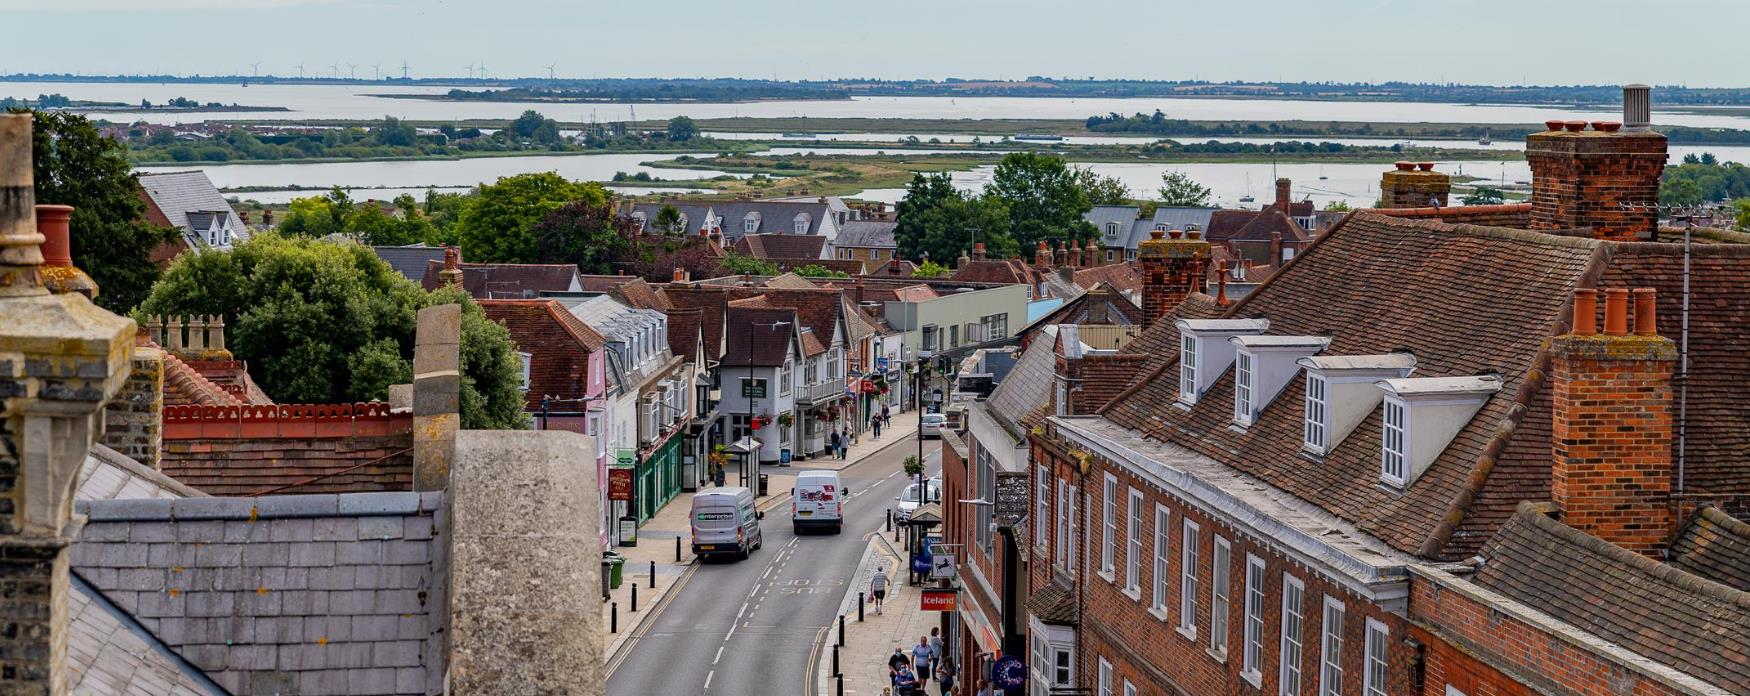 A view of Maldon from the roof of Moot Hall